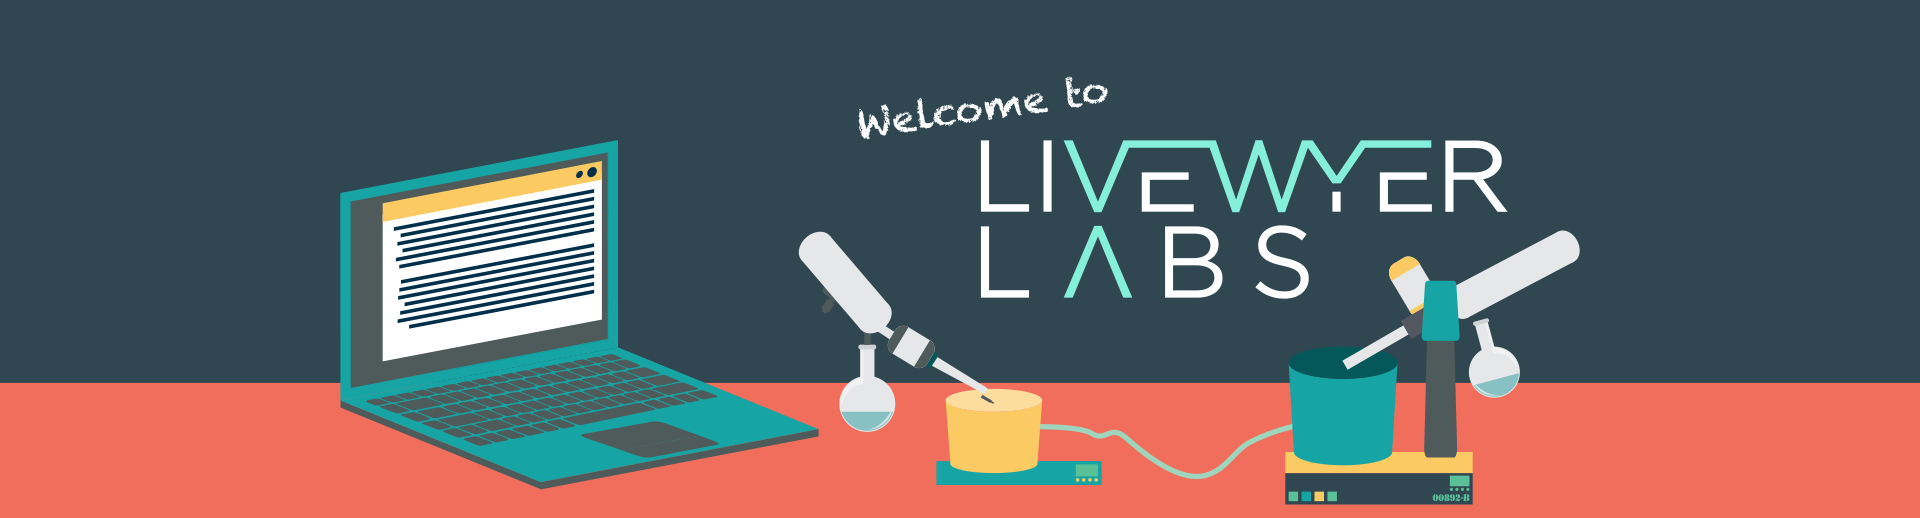 A laptop, some laboratory equipment, and the text 'Welcome to LiveWyer Labs'